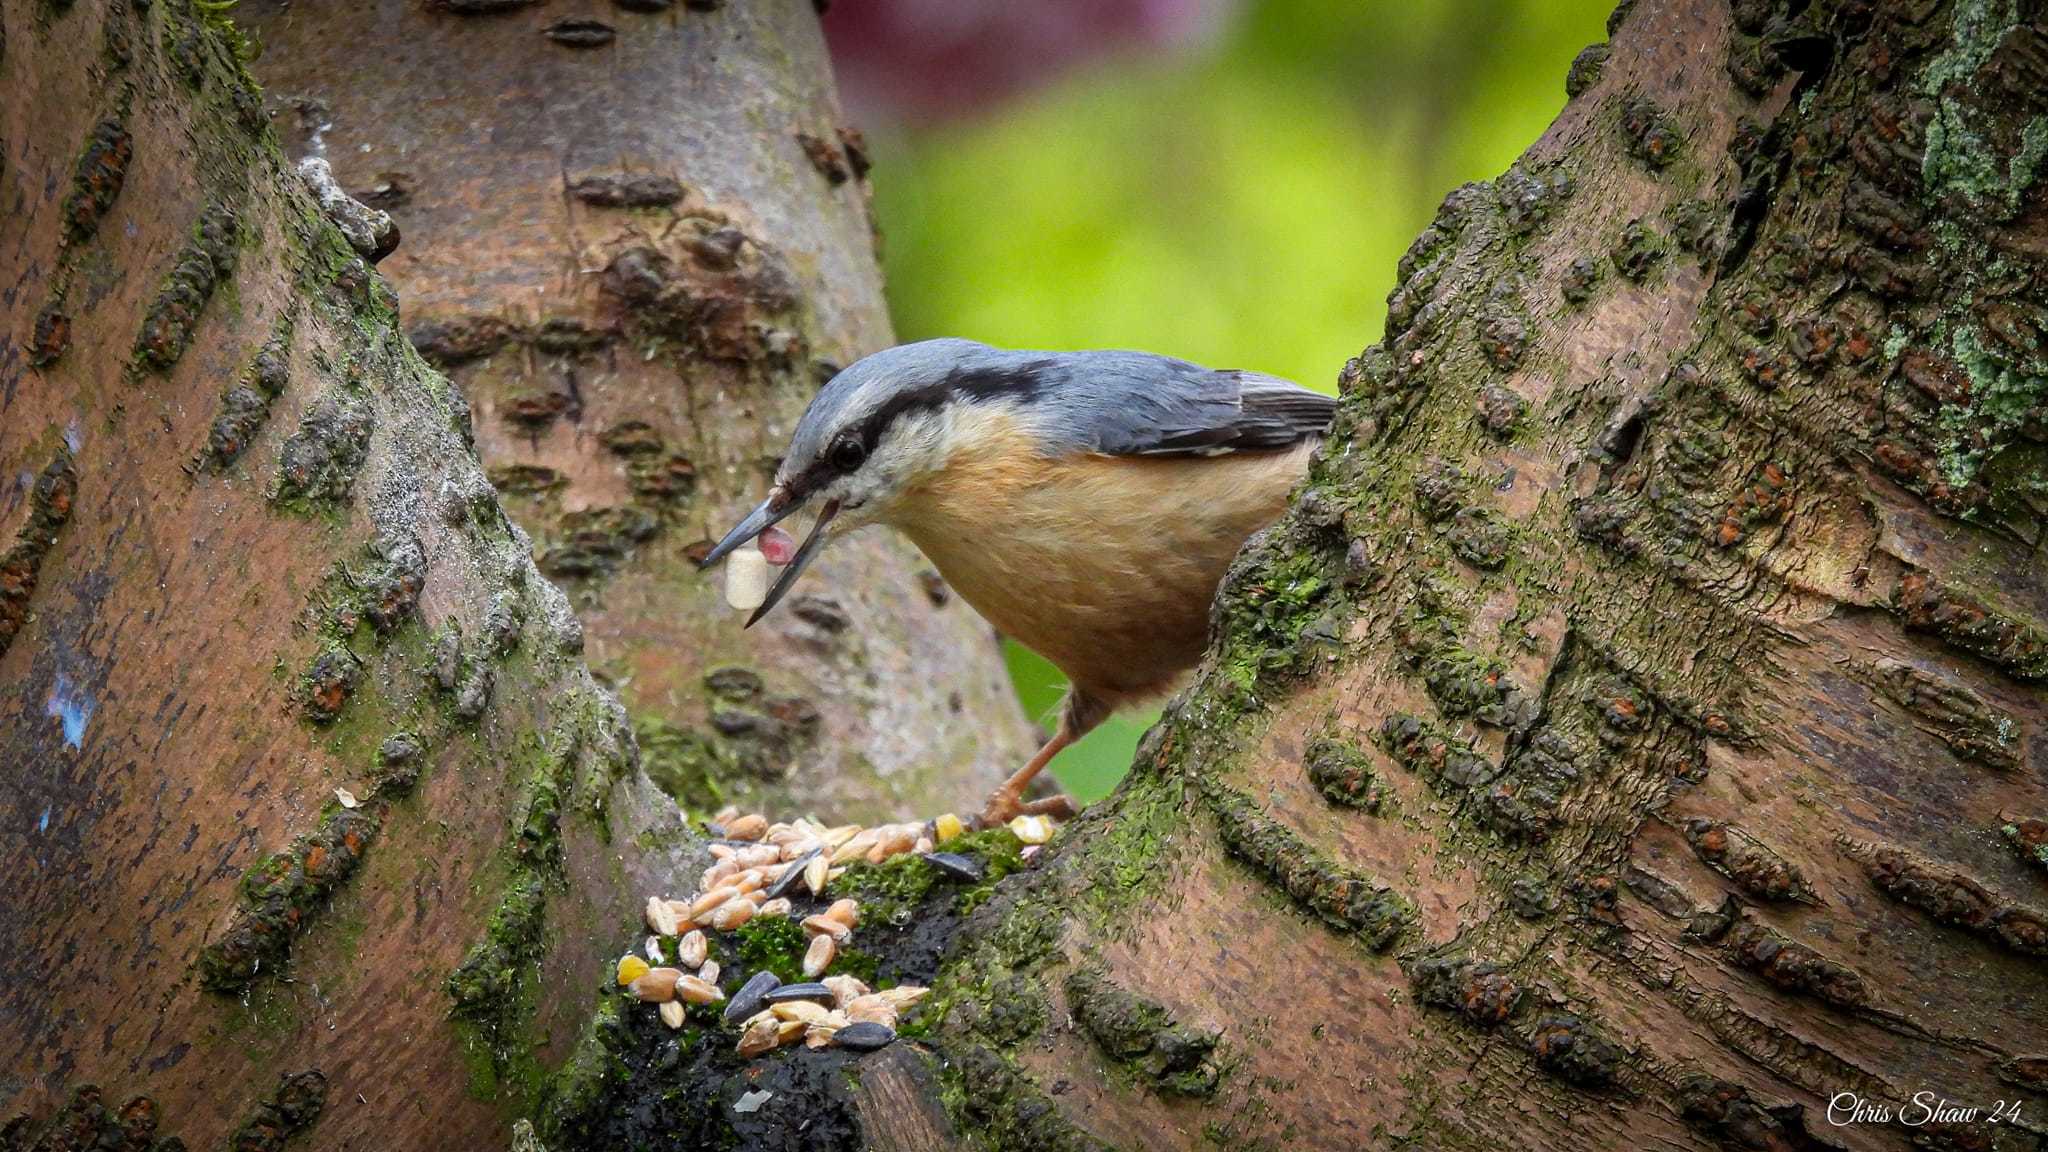 Nut hatch at Sherdley Park by Chris Shaw